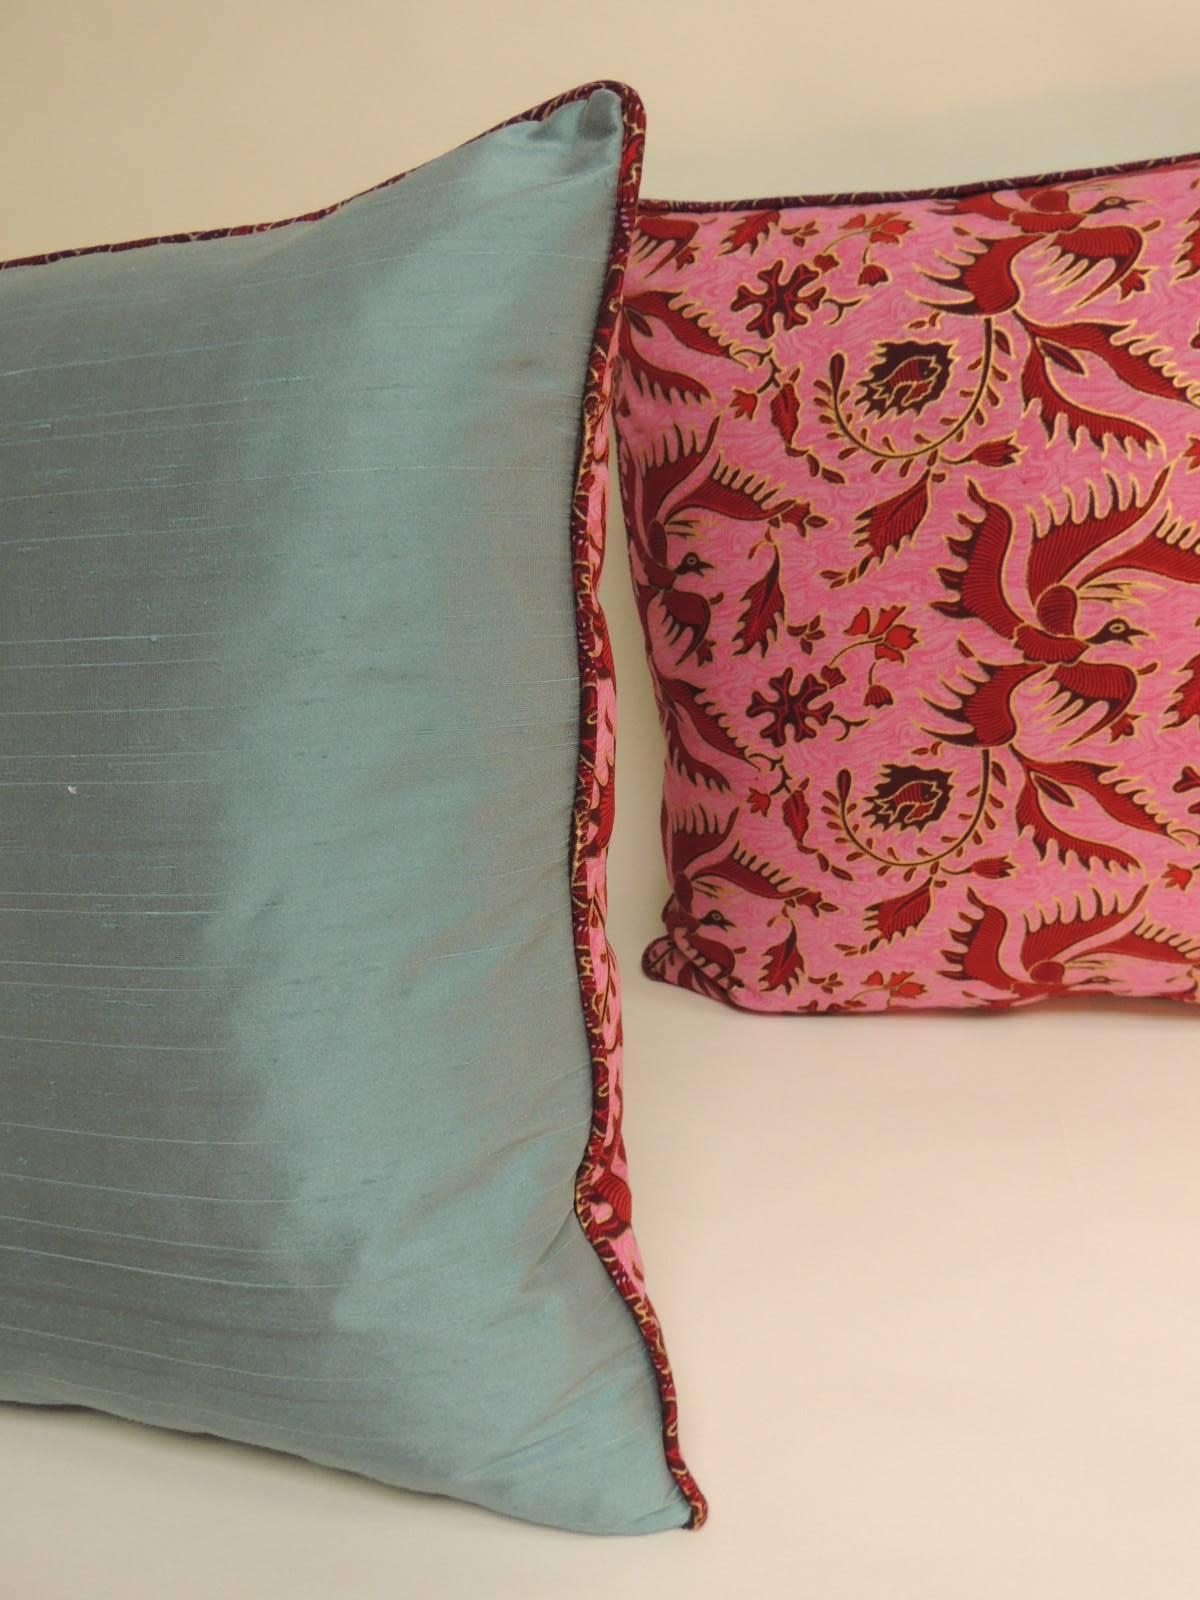 Hand-Crafted Pair of Vintage Red and Pink Hand-Blocked Batik Decorative Pillows